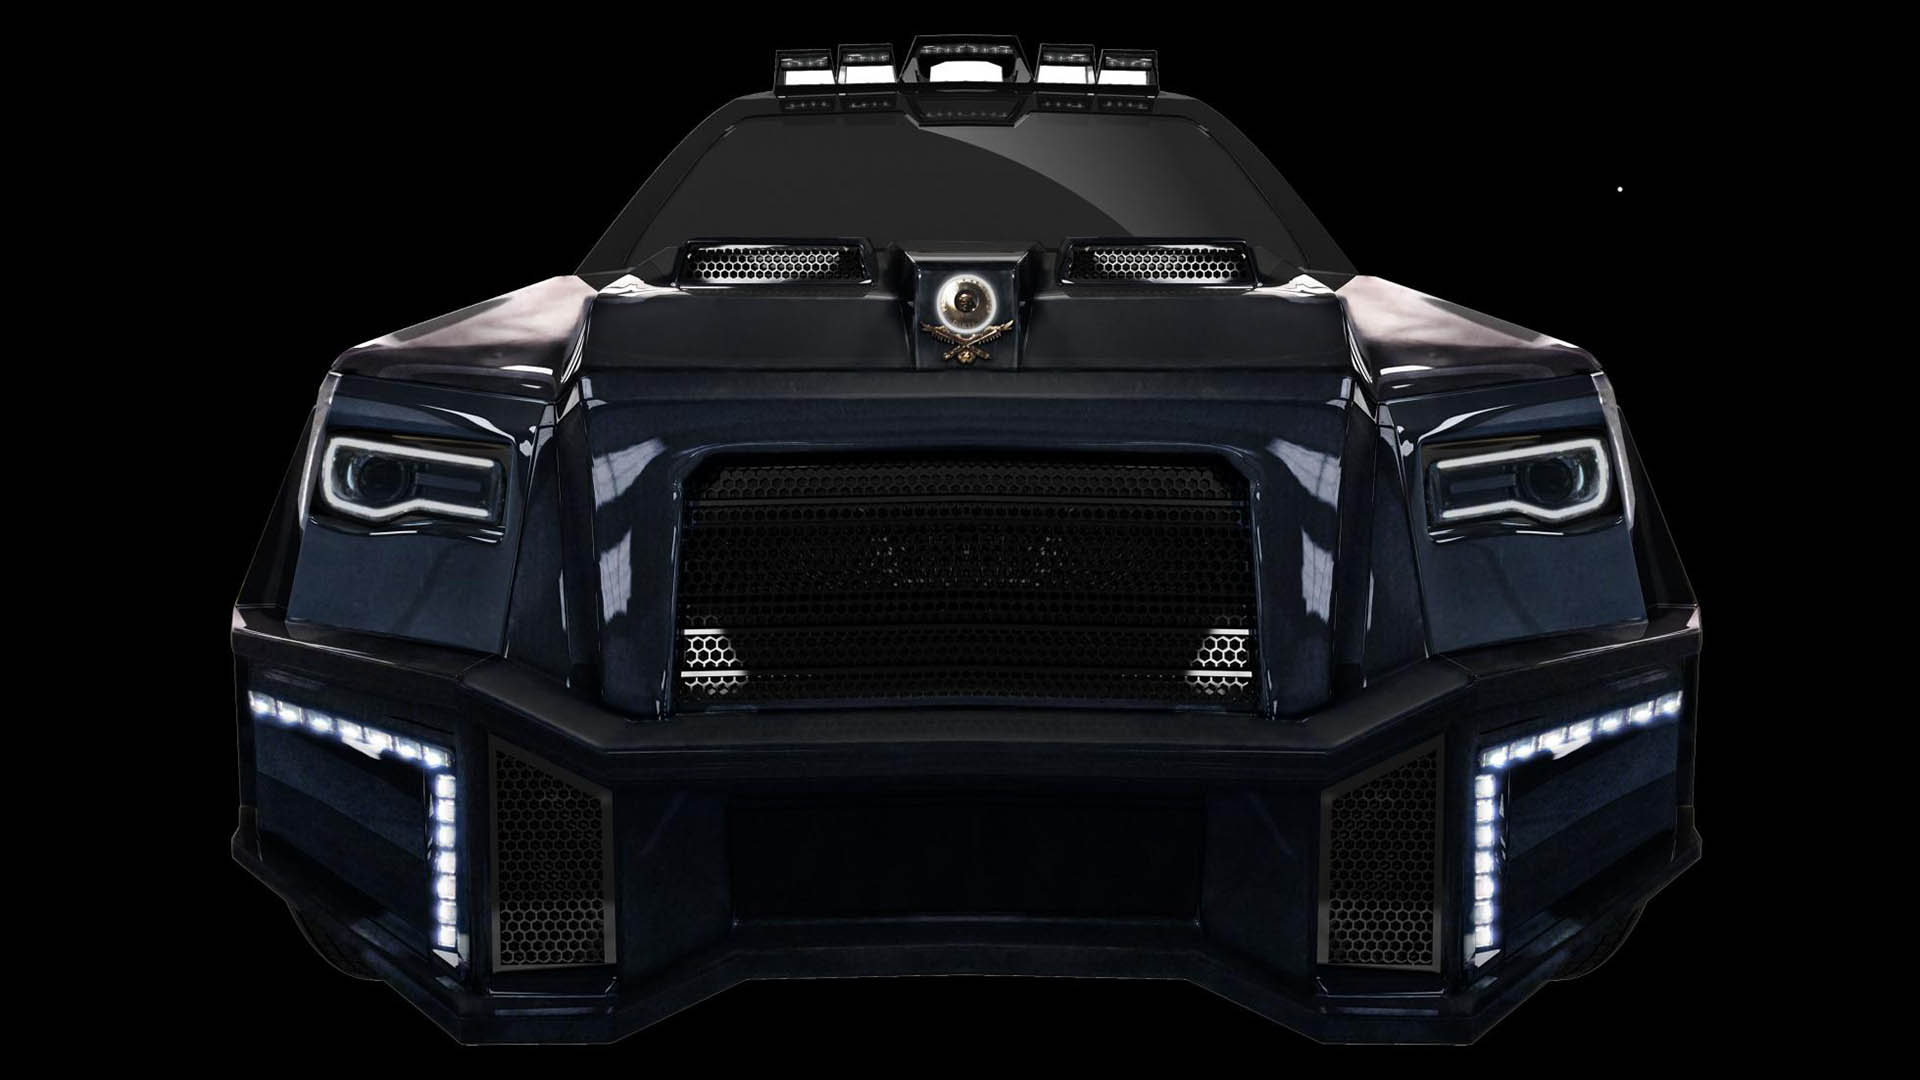 Dartz Debuts New Black Alligator SUV, Only Accepts Bitcoin and Ethereum